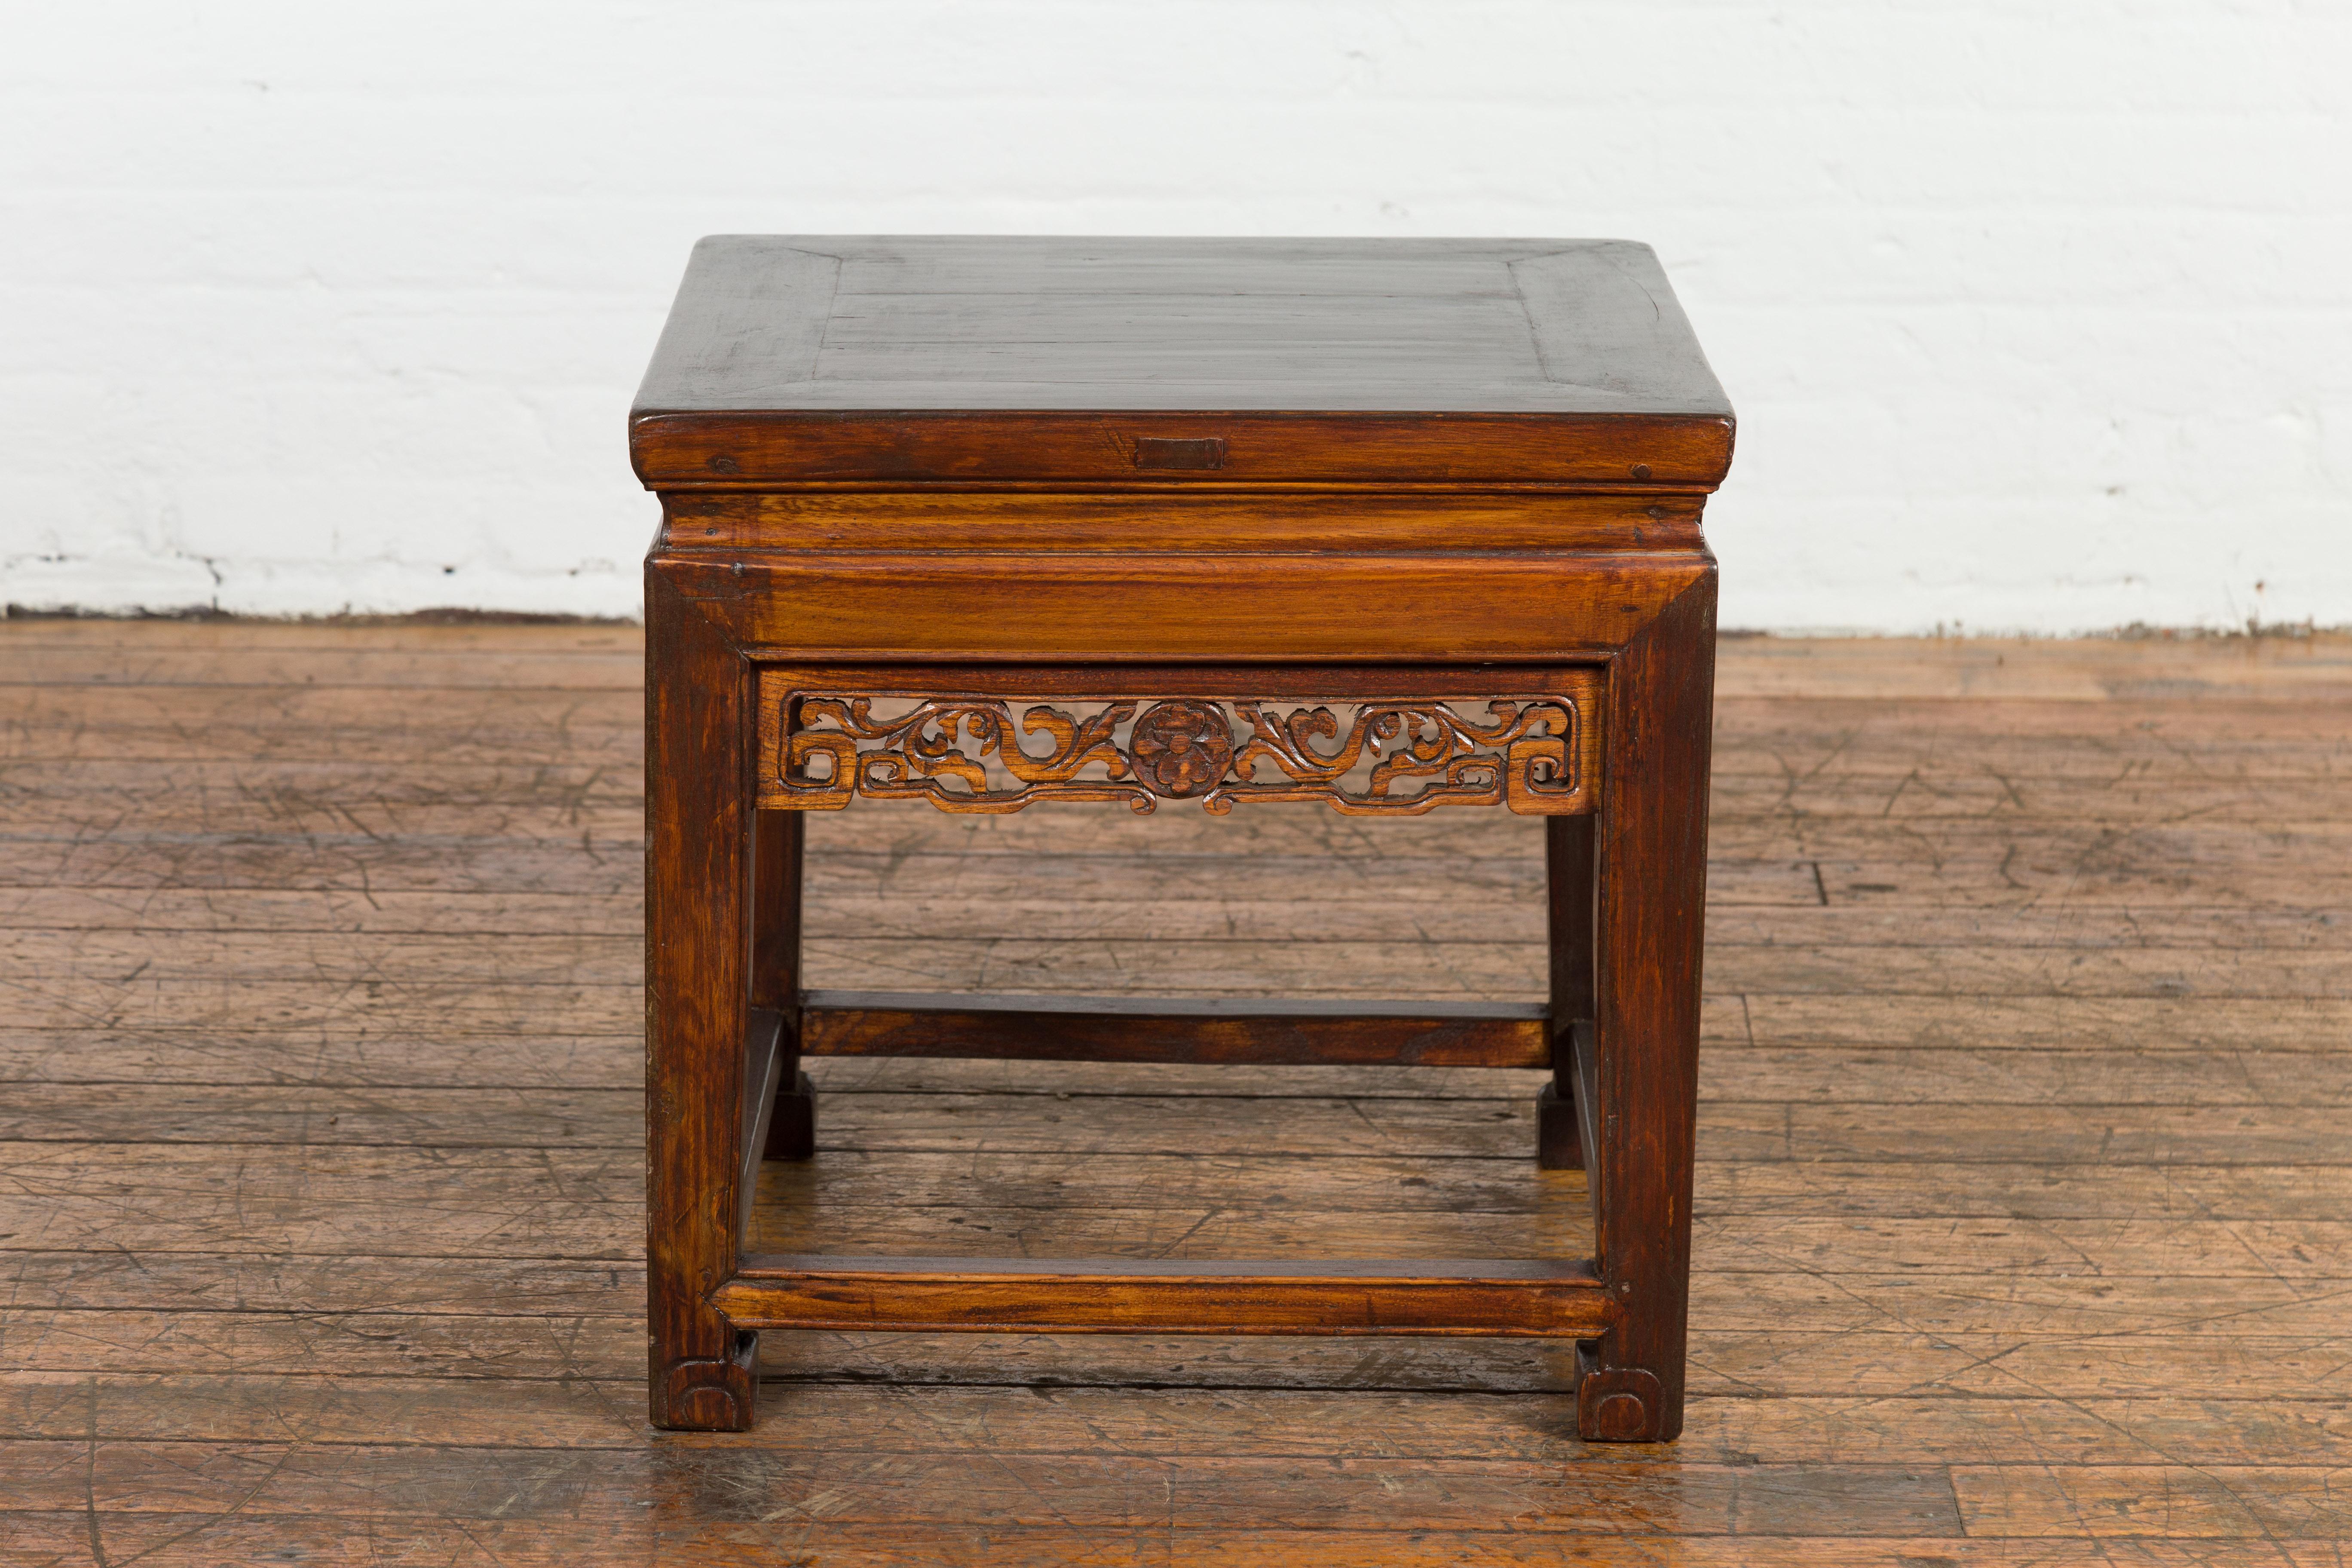 A Chinese late Qing Dynasty period side table from the early 20th century with carved apron and scrolling feet. Infusing both utility and aesthetics, this Chinese late Qing Dynasty period side table from the early 20th century effortlessly strikes a